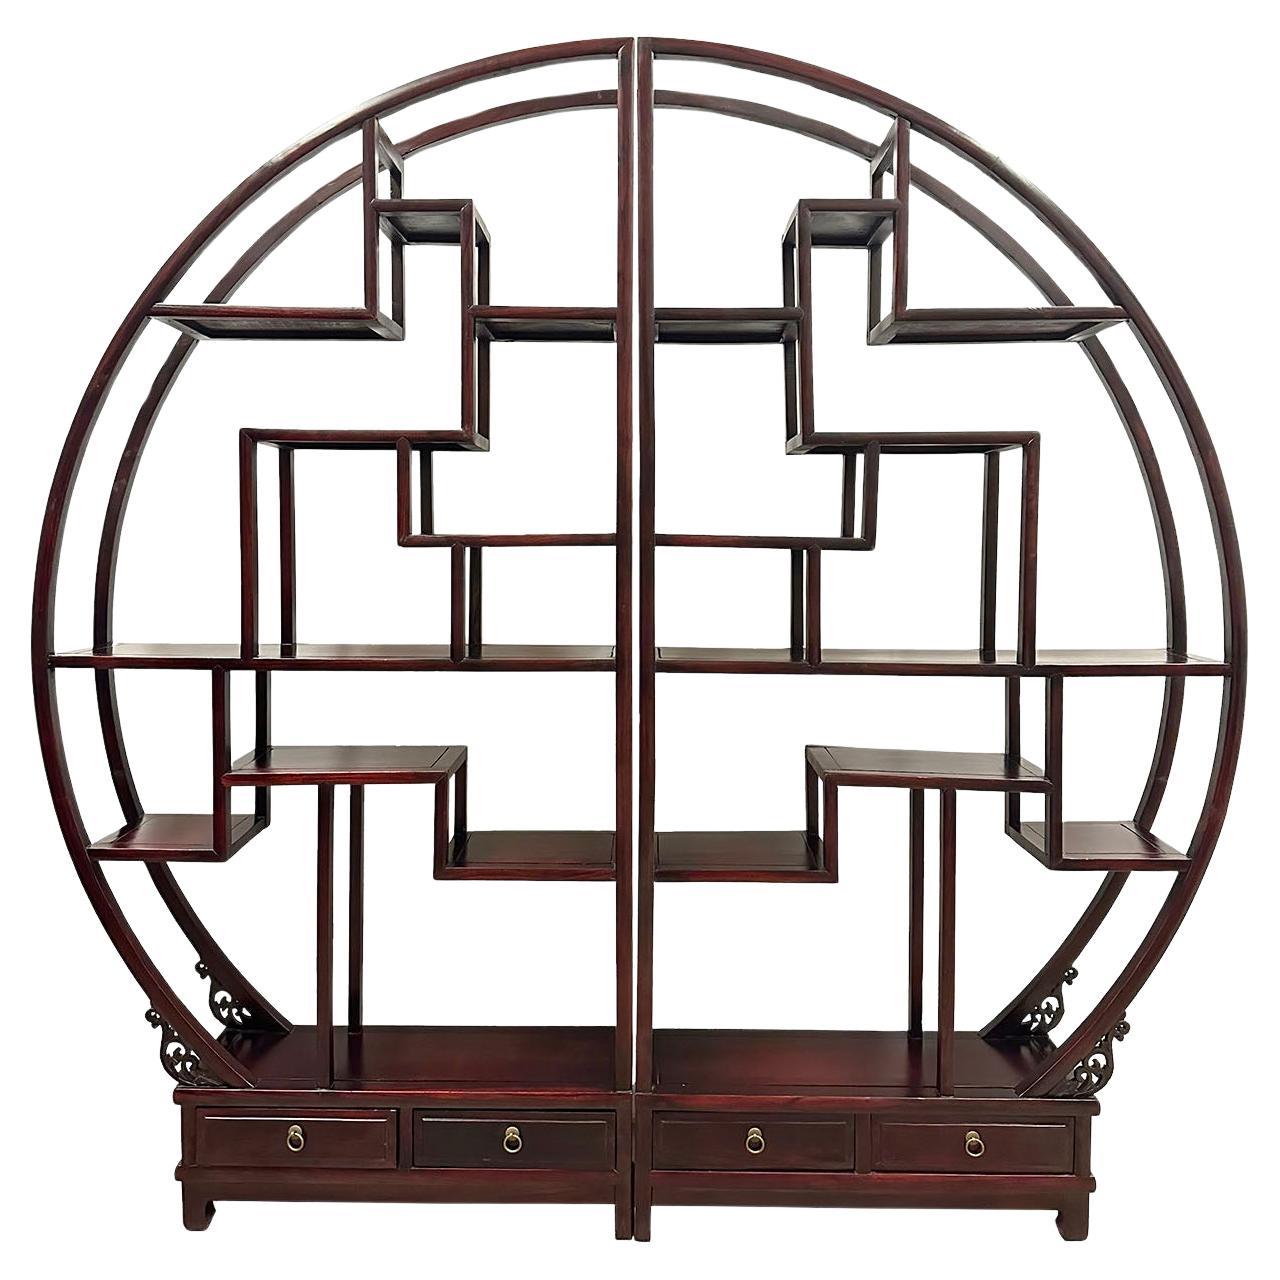 Mid-20th Century Chinese Carved Collector's Display Shelf/Room Divider